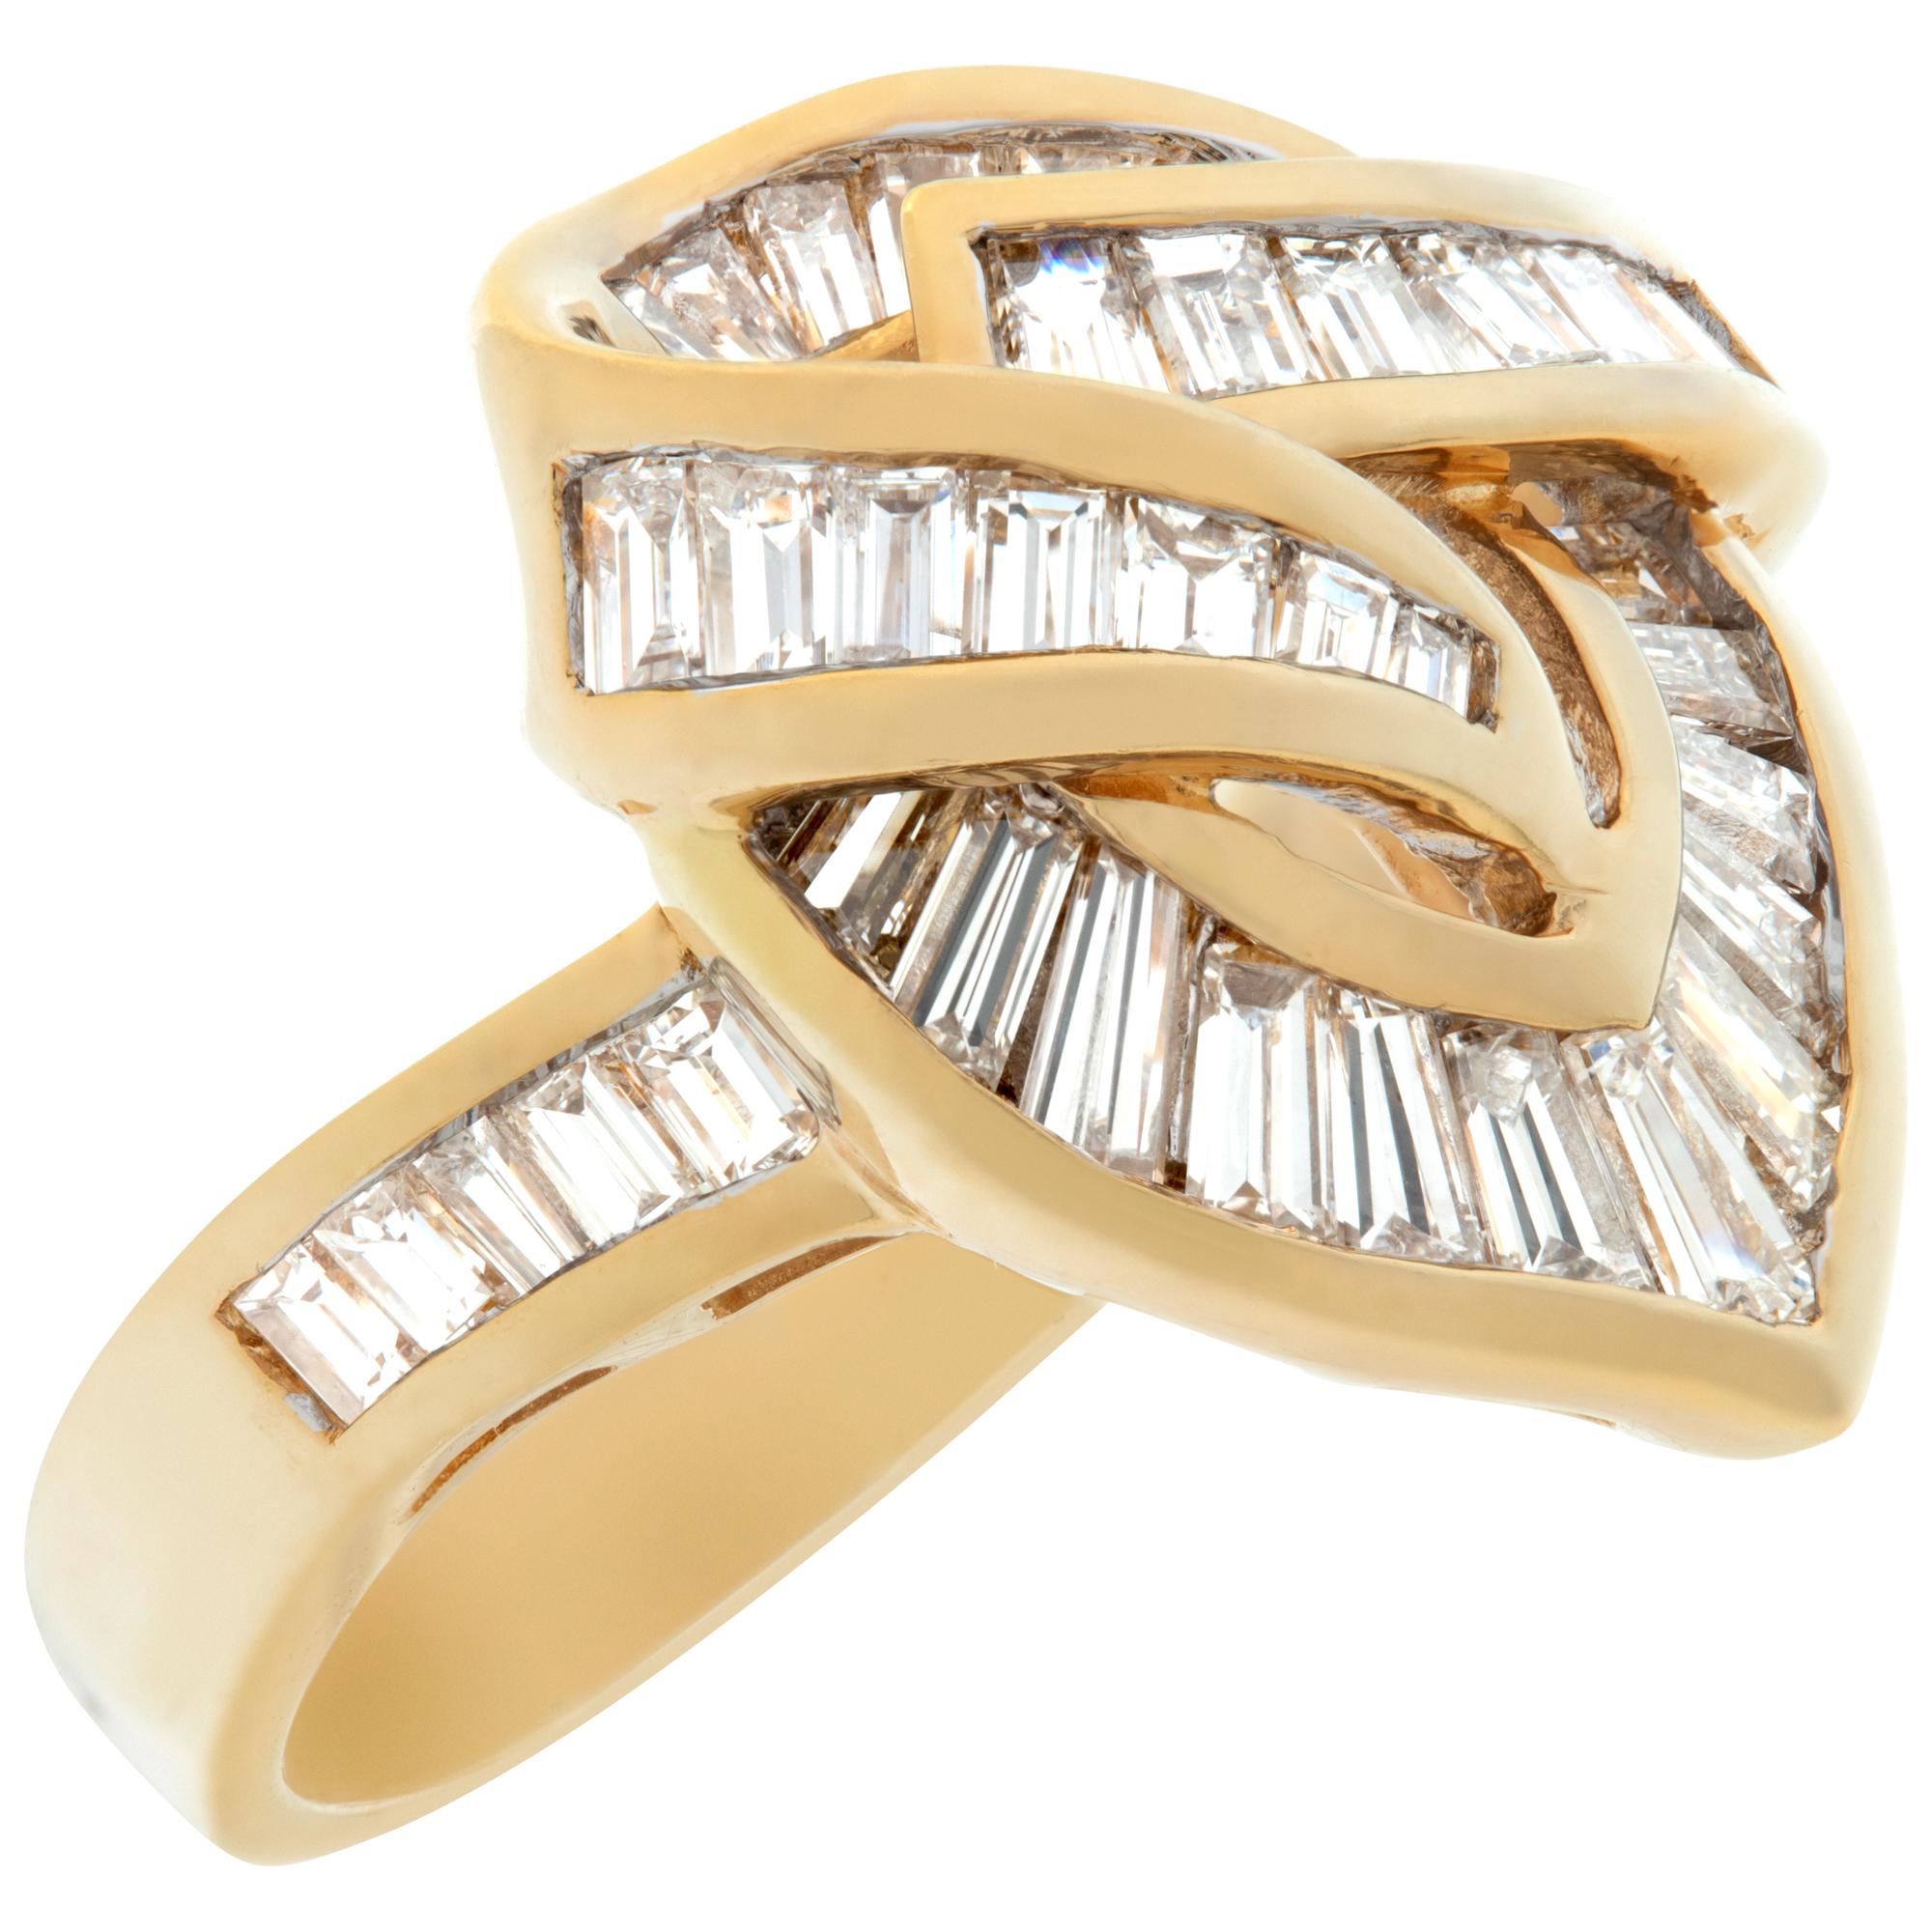 Yellow gold swirl of diamonds ring w/ around 3 carats in baguette diamonds In Excellent Condition For Sale In Surfside, FL